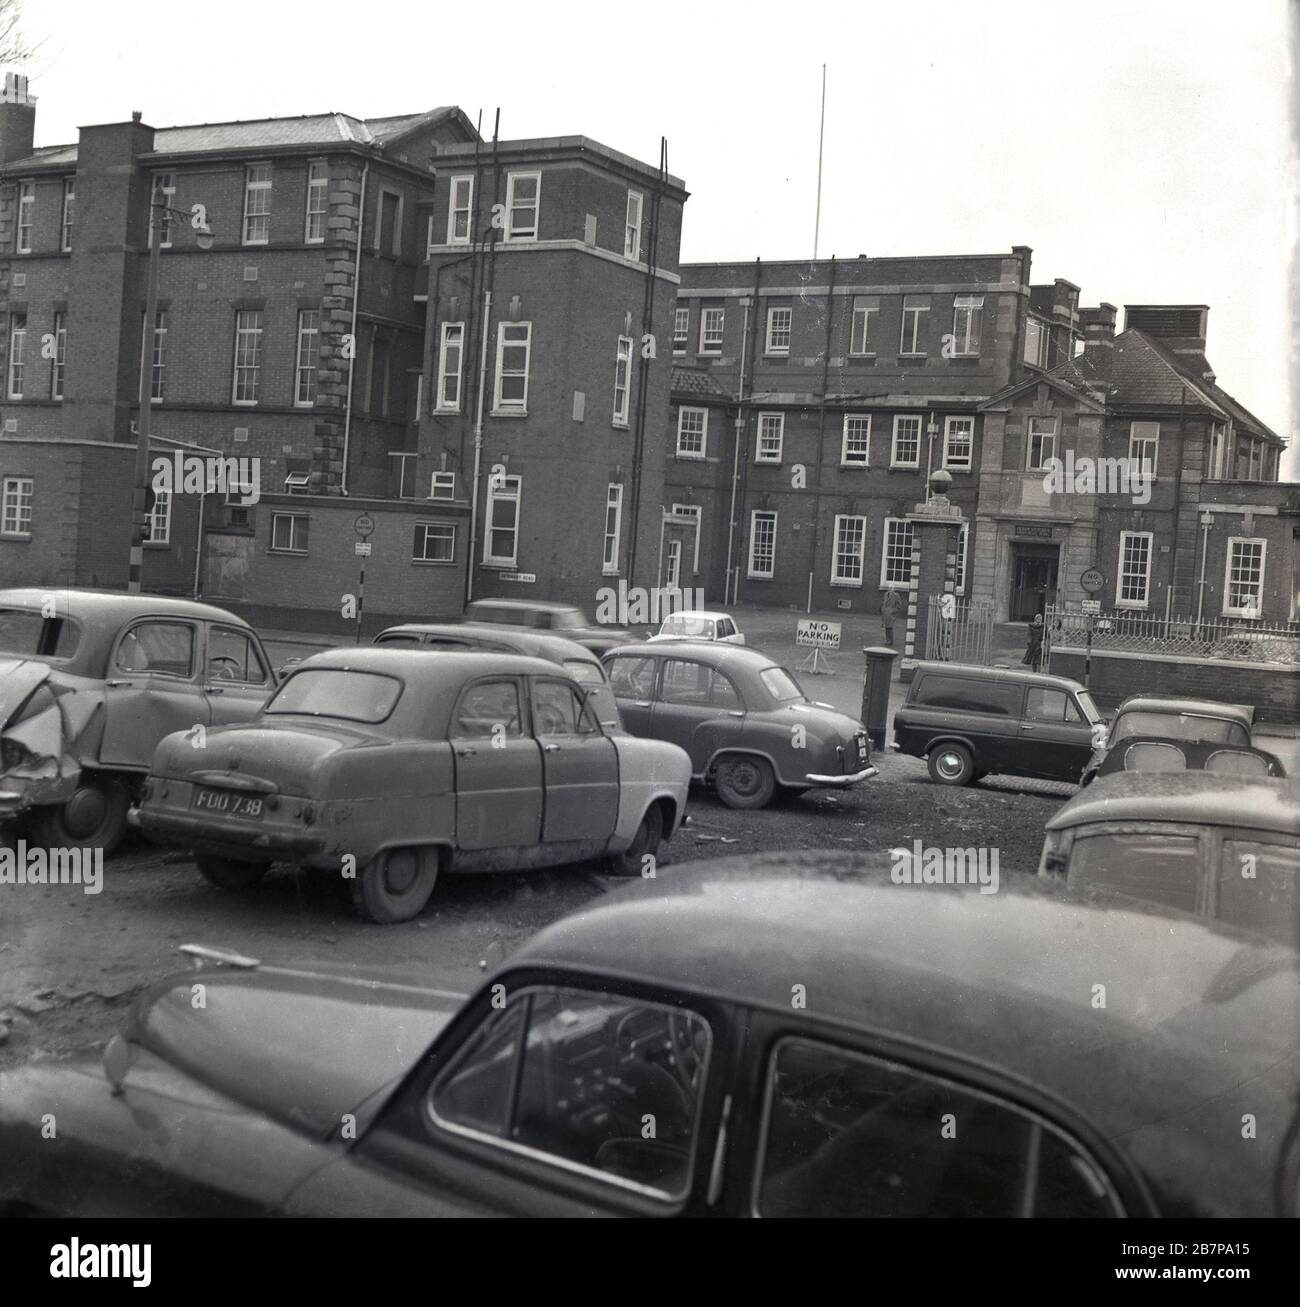 1960s, historical, cars of the era, many of them damaged and abandoned, parked on rough or waste ground, outside a victorian hospital building, South East London, England, UK. Stock Photo